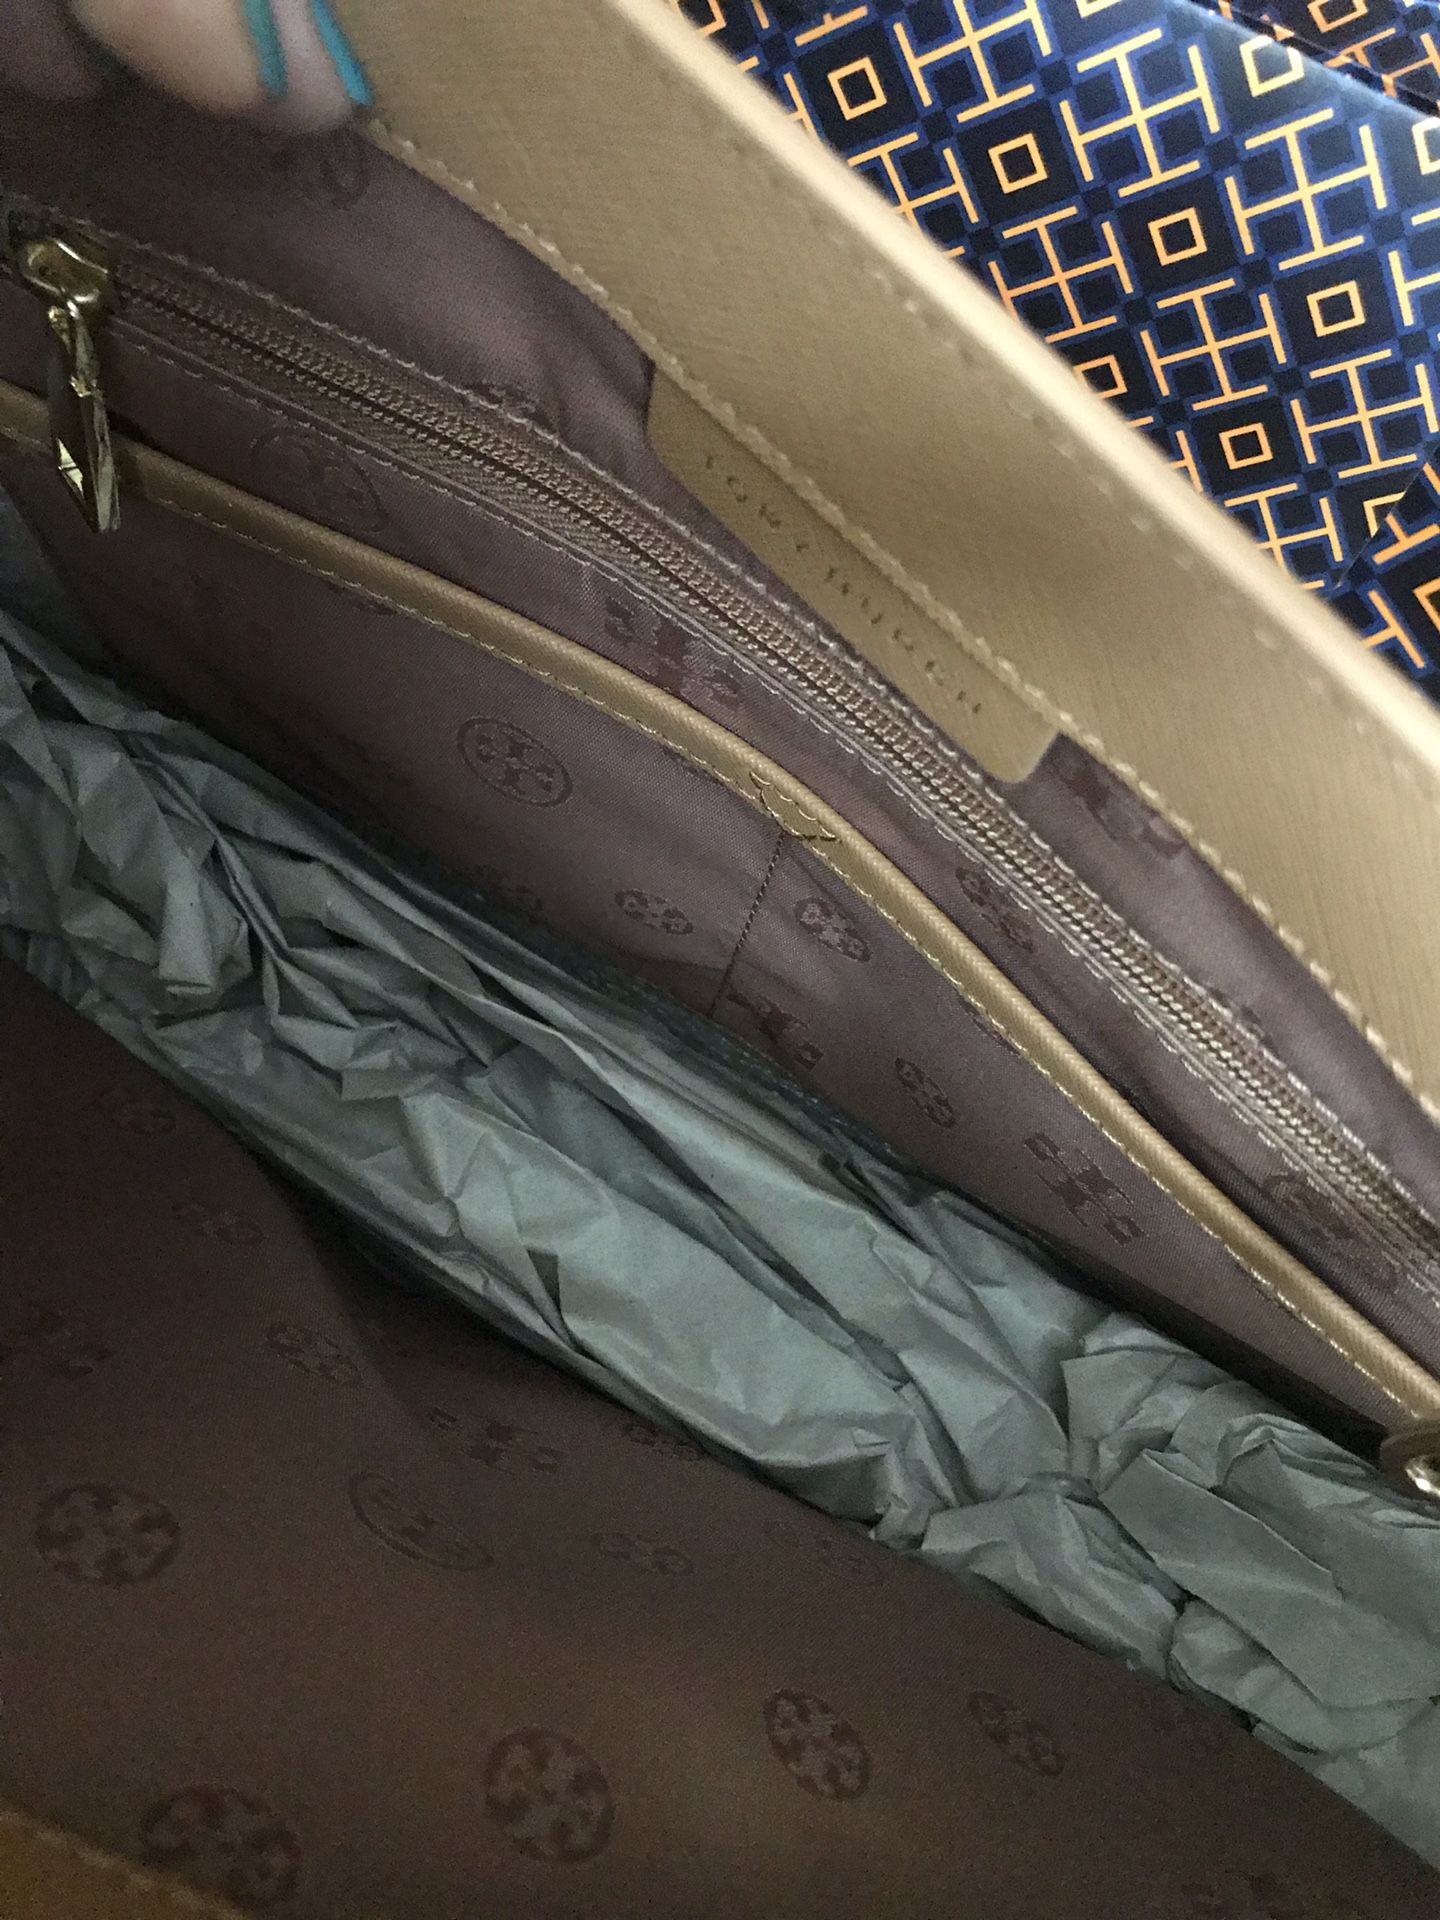 Brand New! ️ Tory Burch Emerson Tote Bag for Sale in Tampa, FL - OfferUp